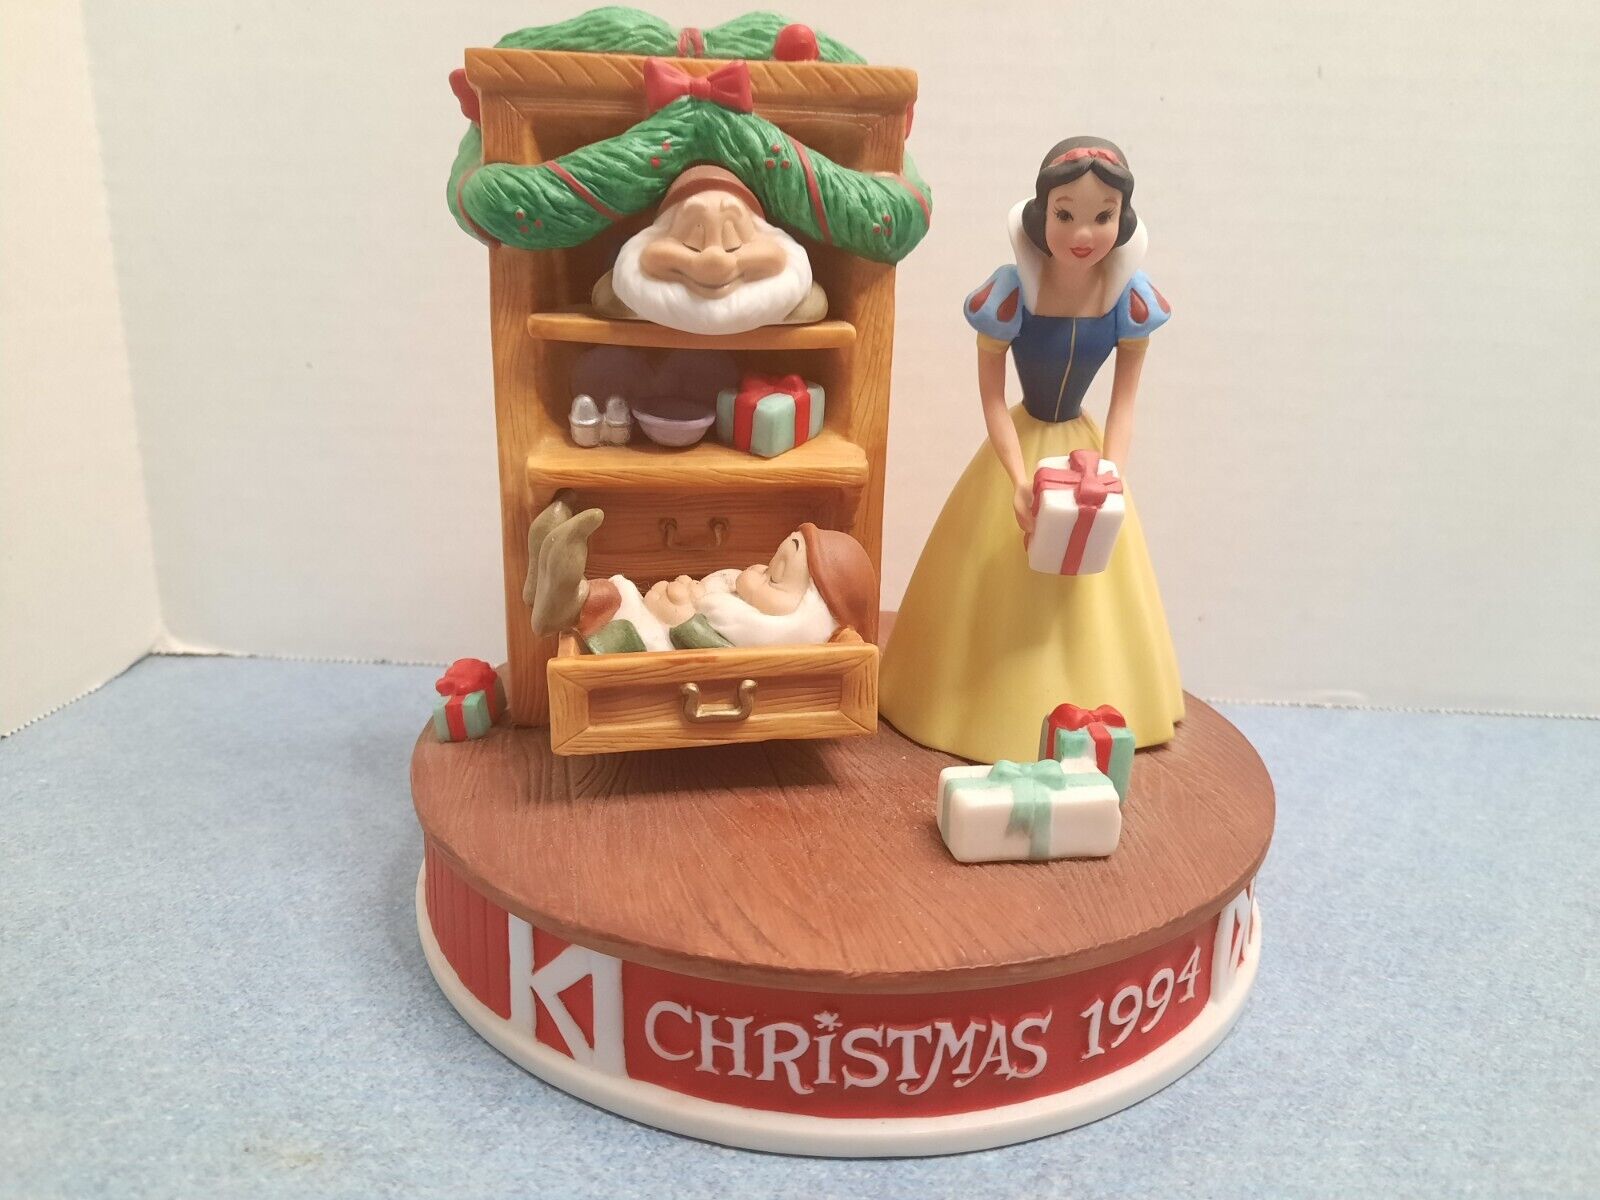 GROLIER COLLECTIBLES - 1994 CHRISTMAS - SNOW WHITE- CHRISTMAS DREAMS WITH BOX